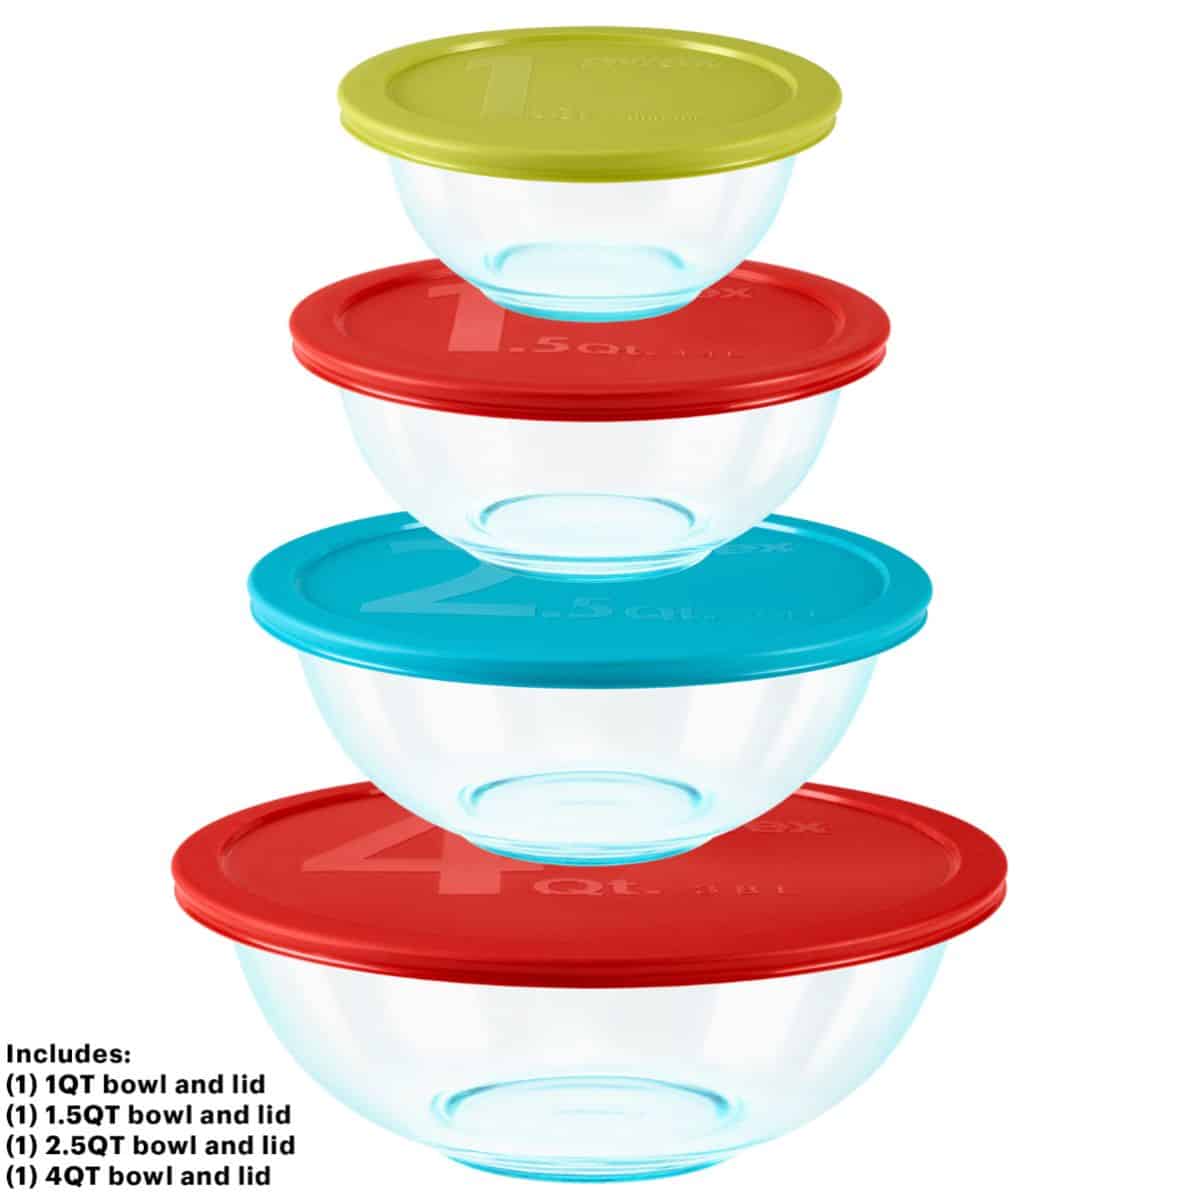 Pyrex Nesting Glass Mixing bowls with lids.